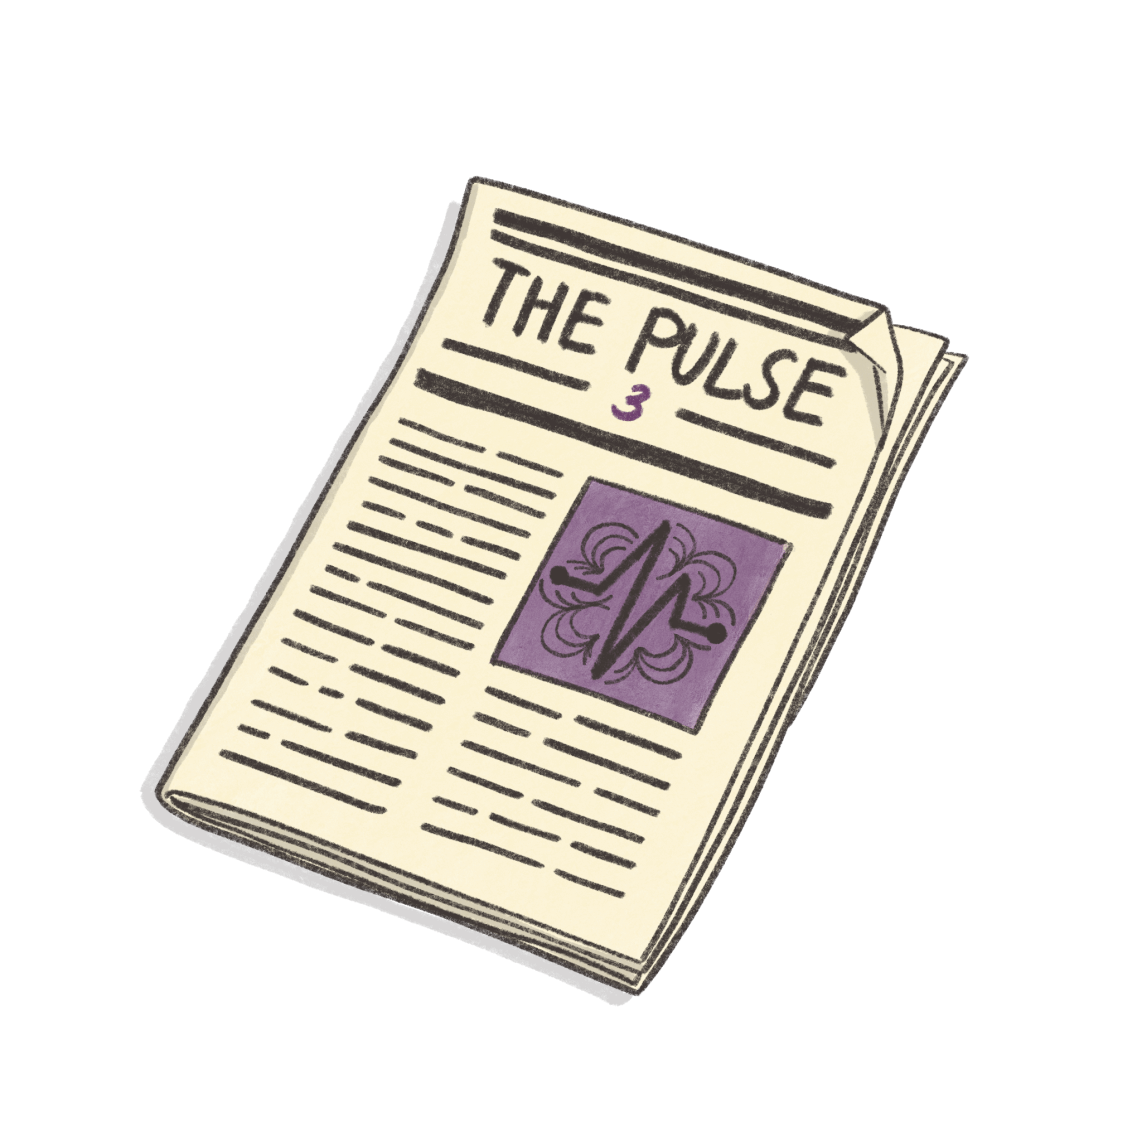 The Apoio Pulse – Issue Three image